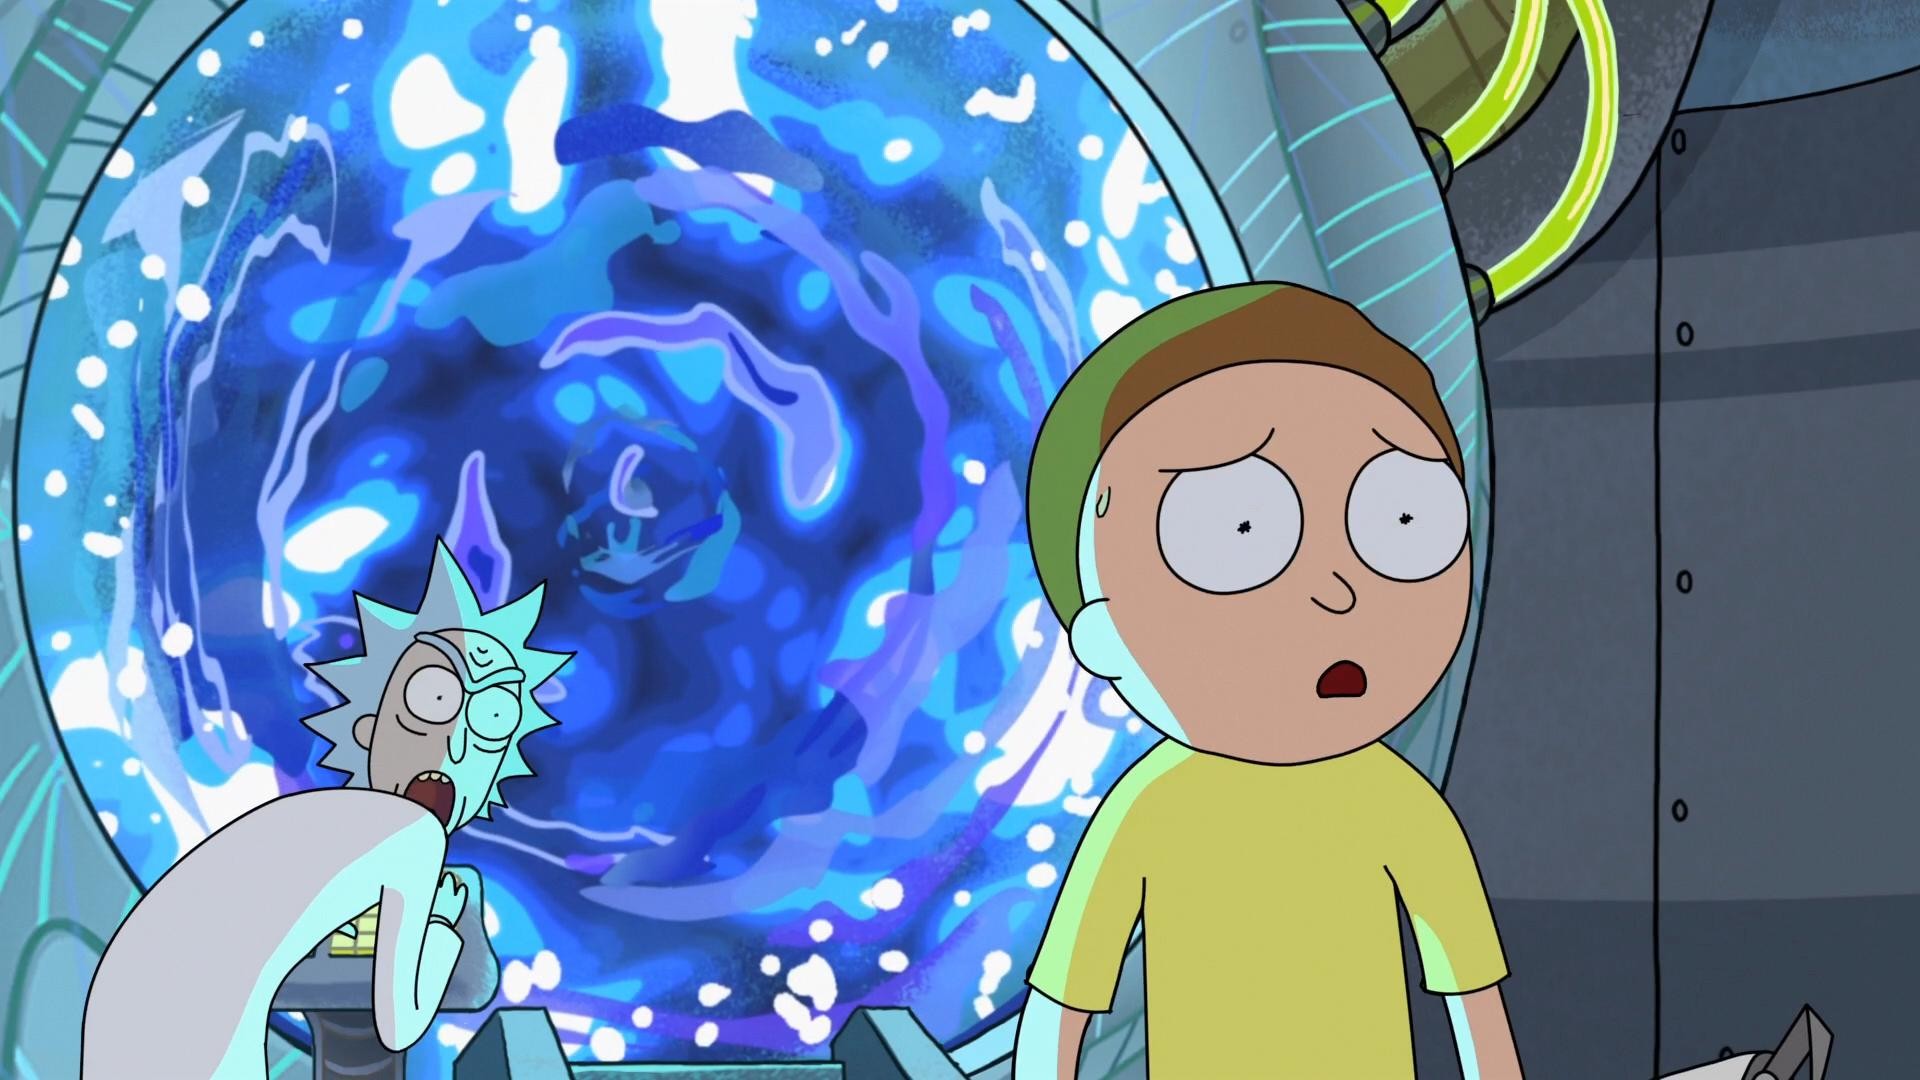 Rick and morty virtual backgrounds | 🌈Rick And Morty Background Art ...